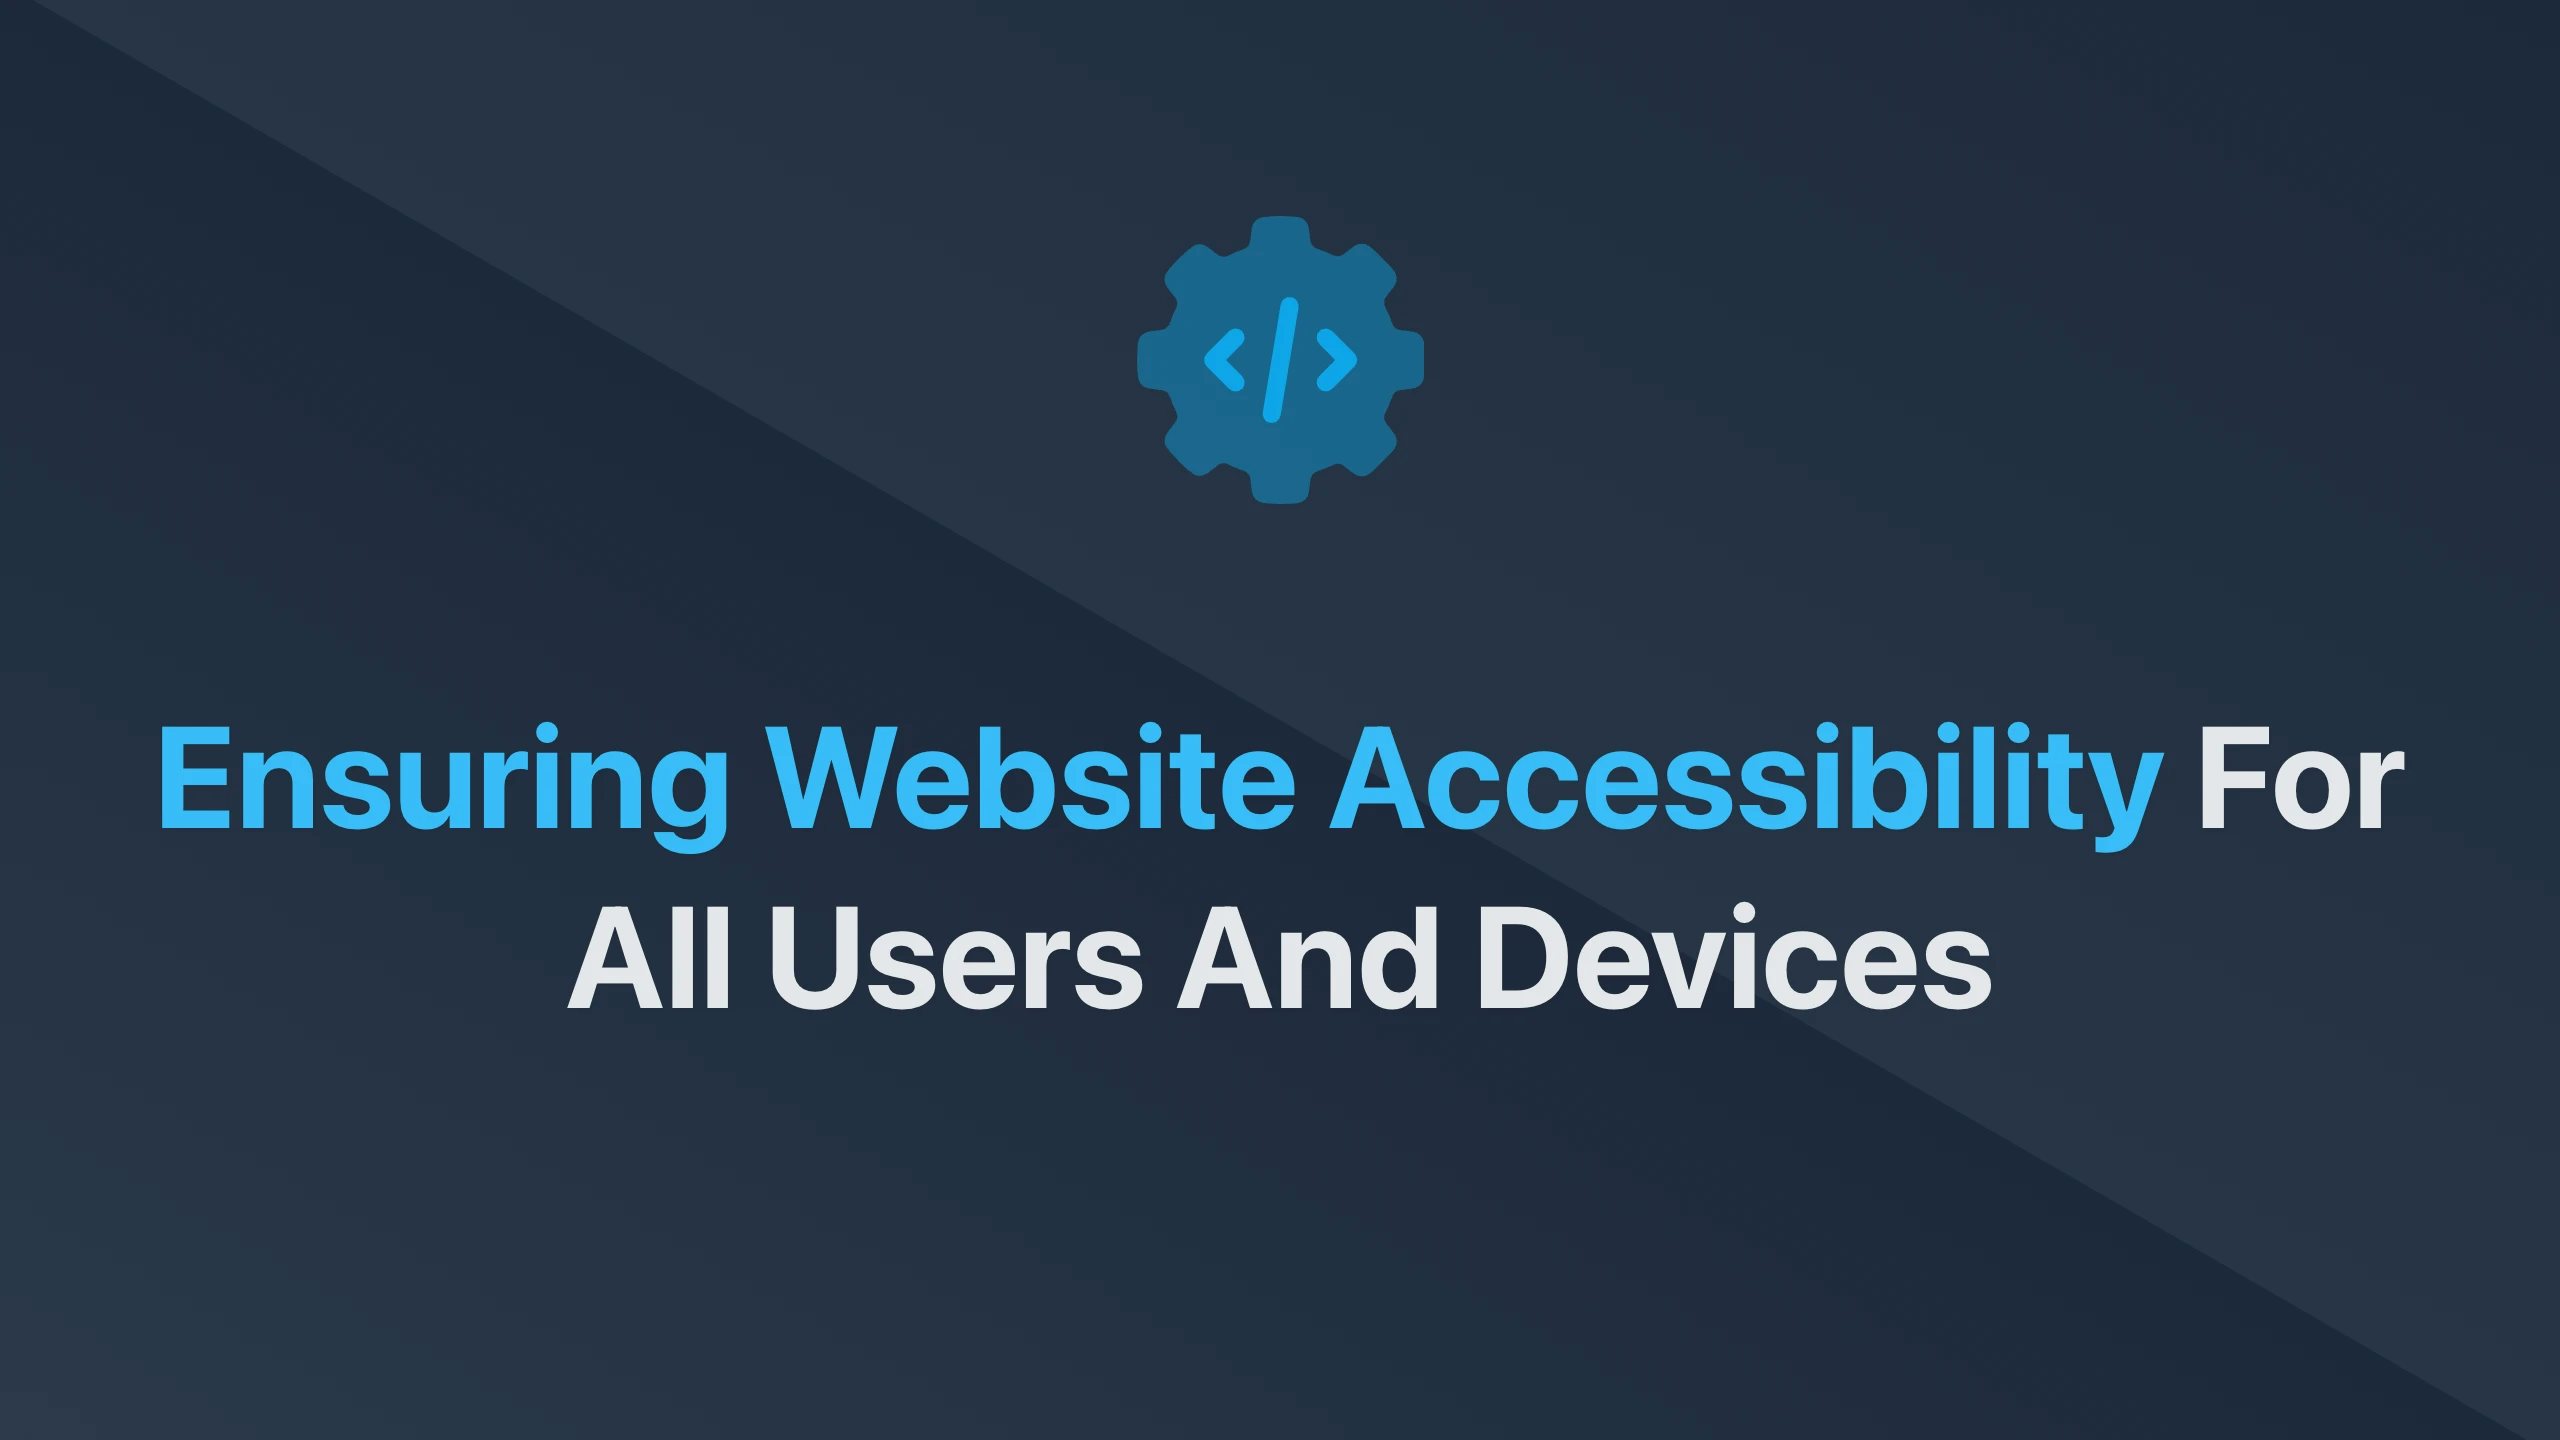 Cover Image for Ensuring Website Accessibility for All Users and Devices